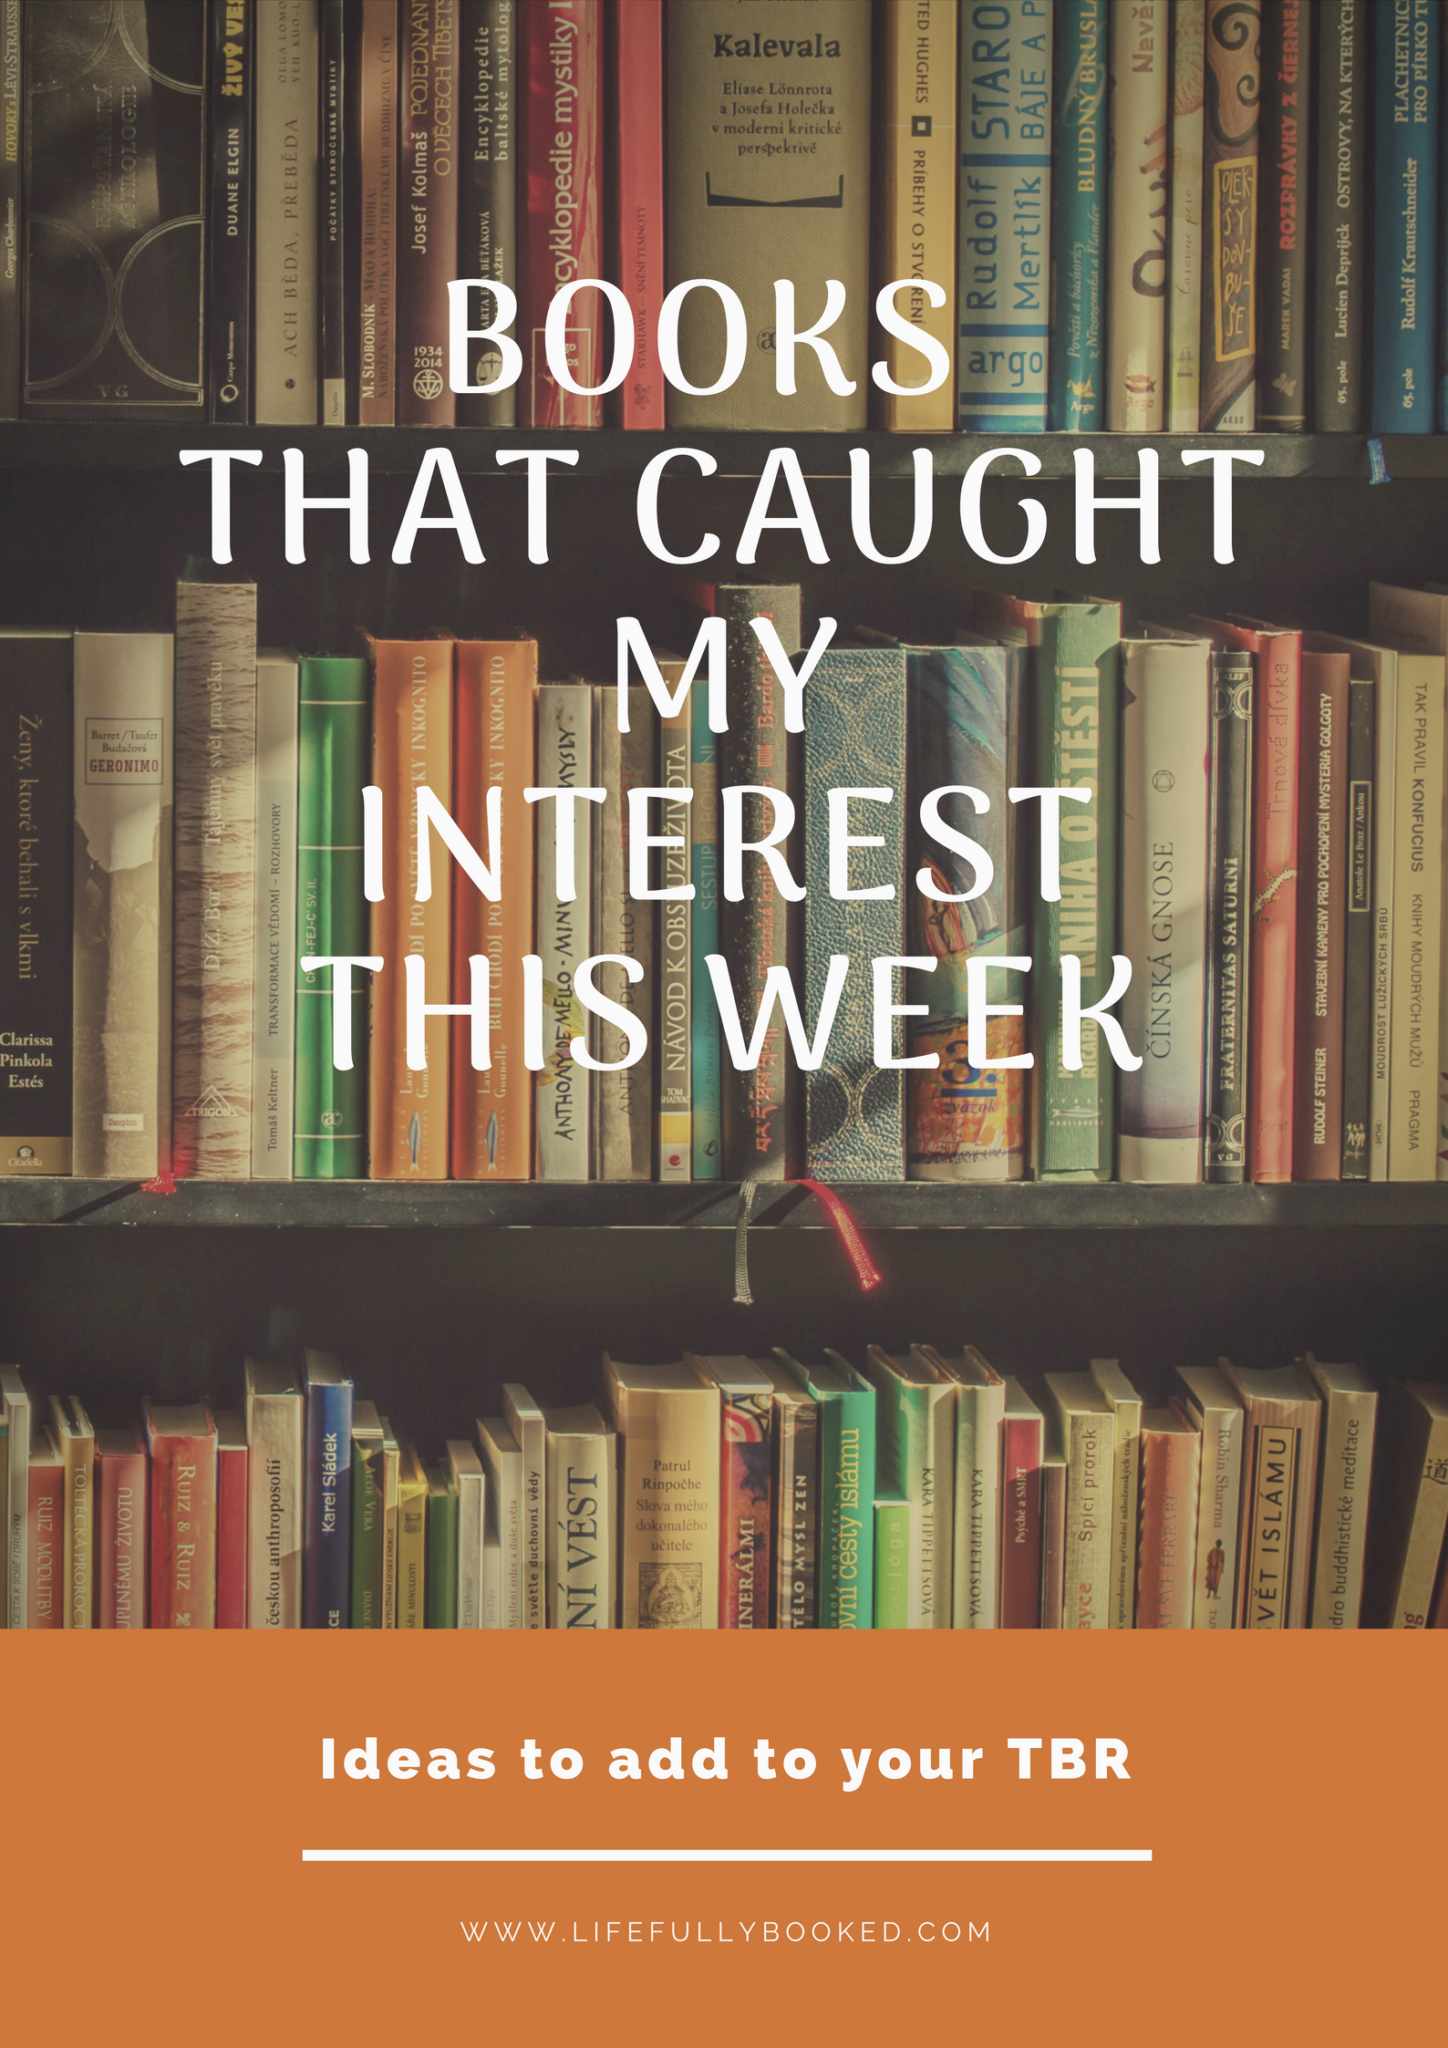 Books that Caught my Interest this Week